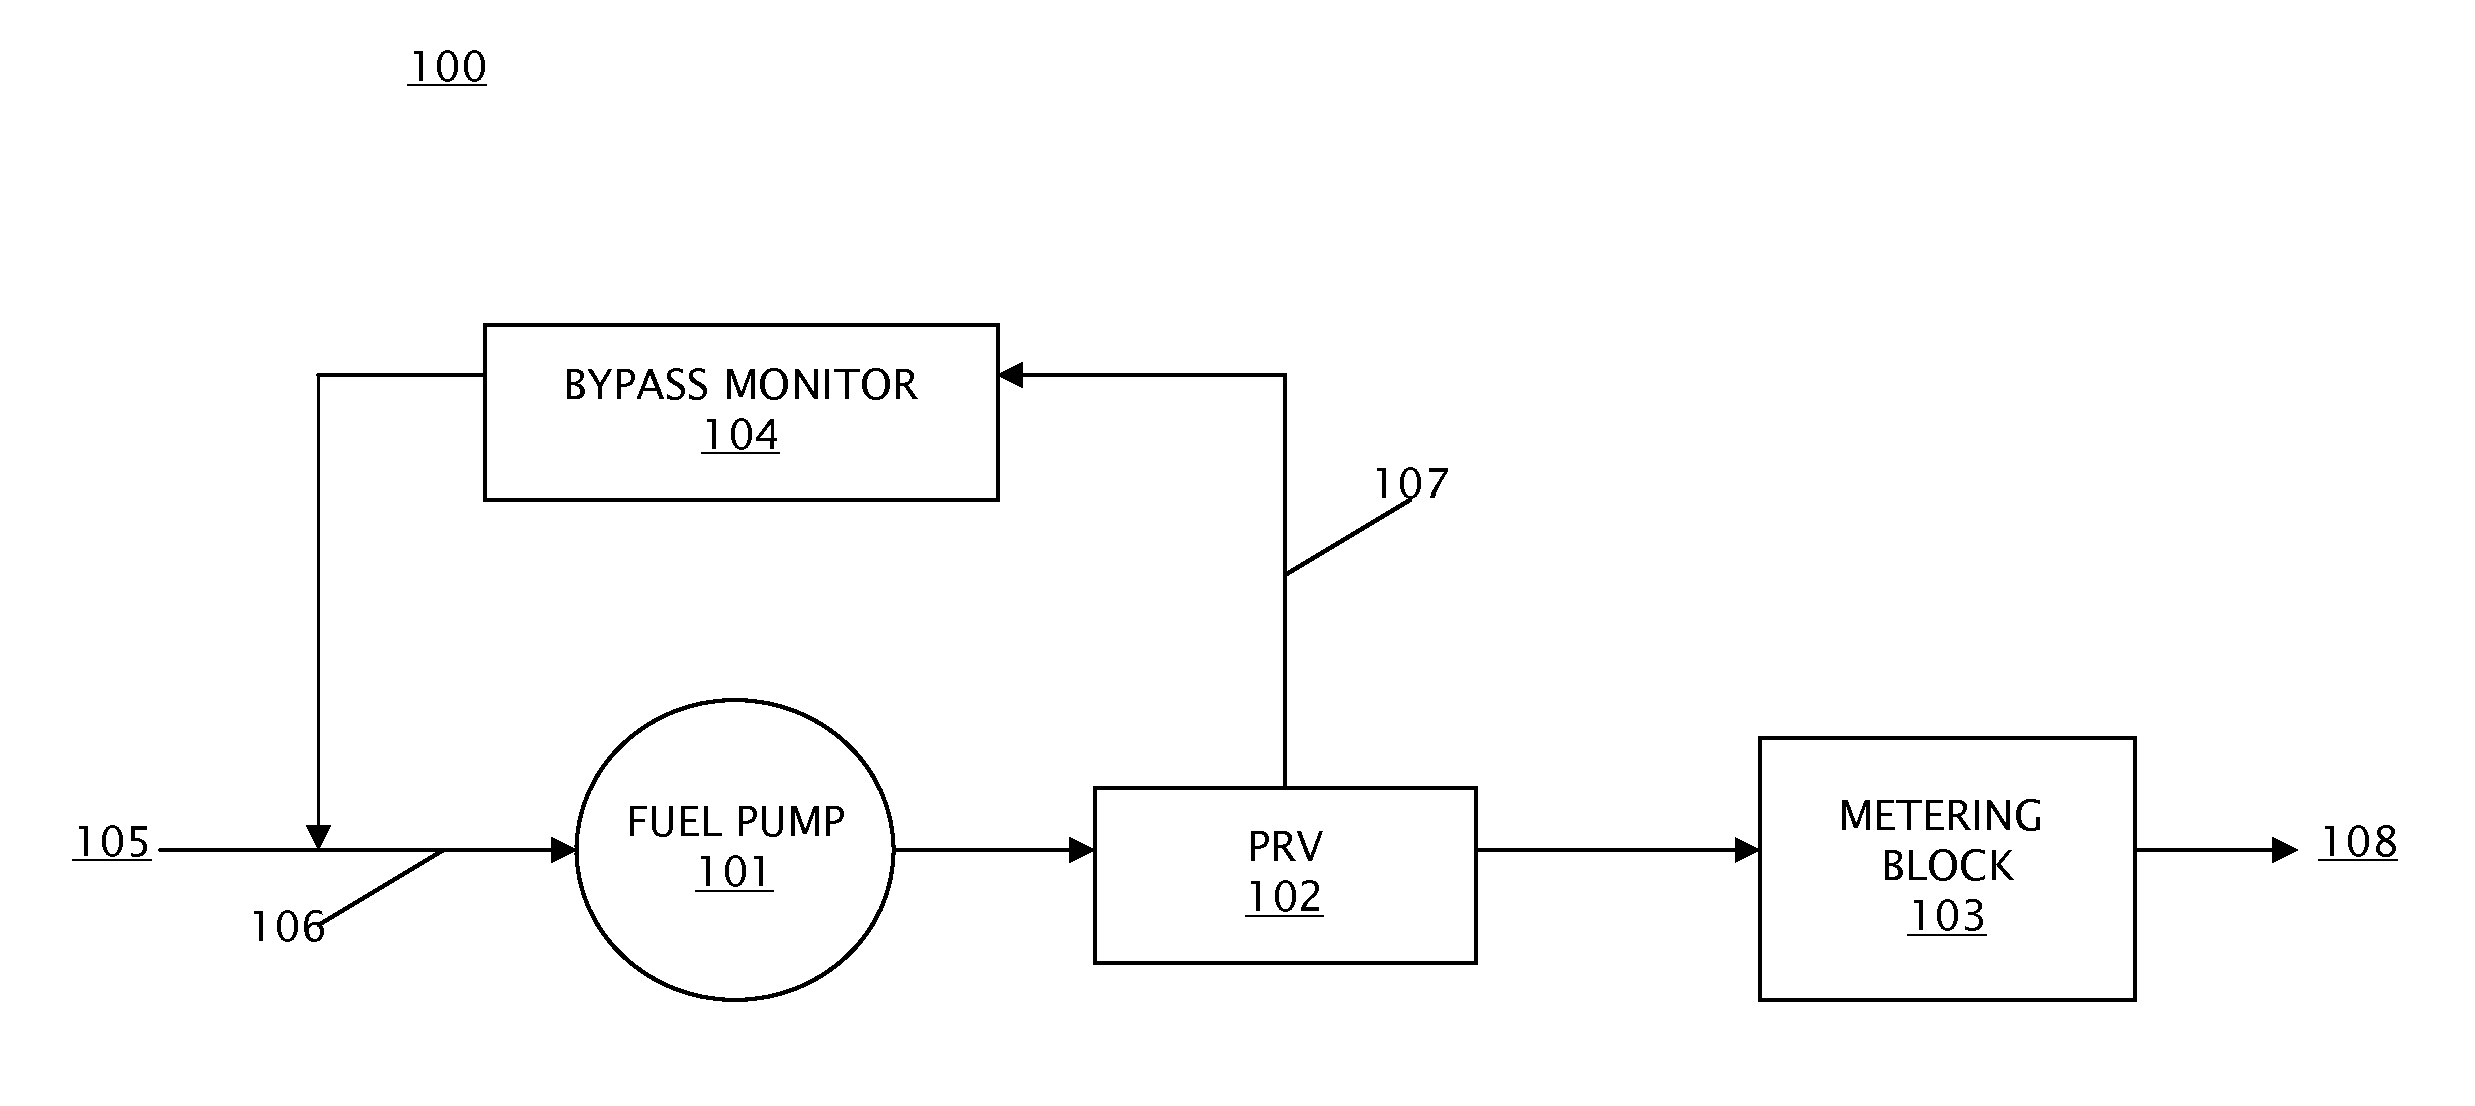 Bypass Monitor for Fuel Supply System